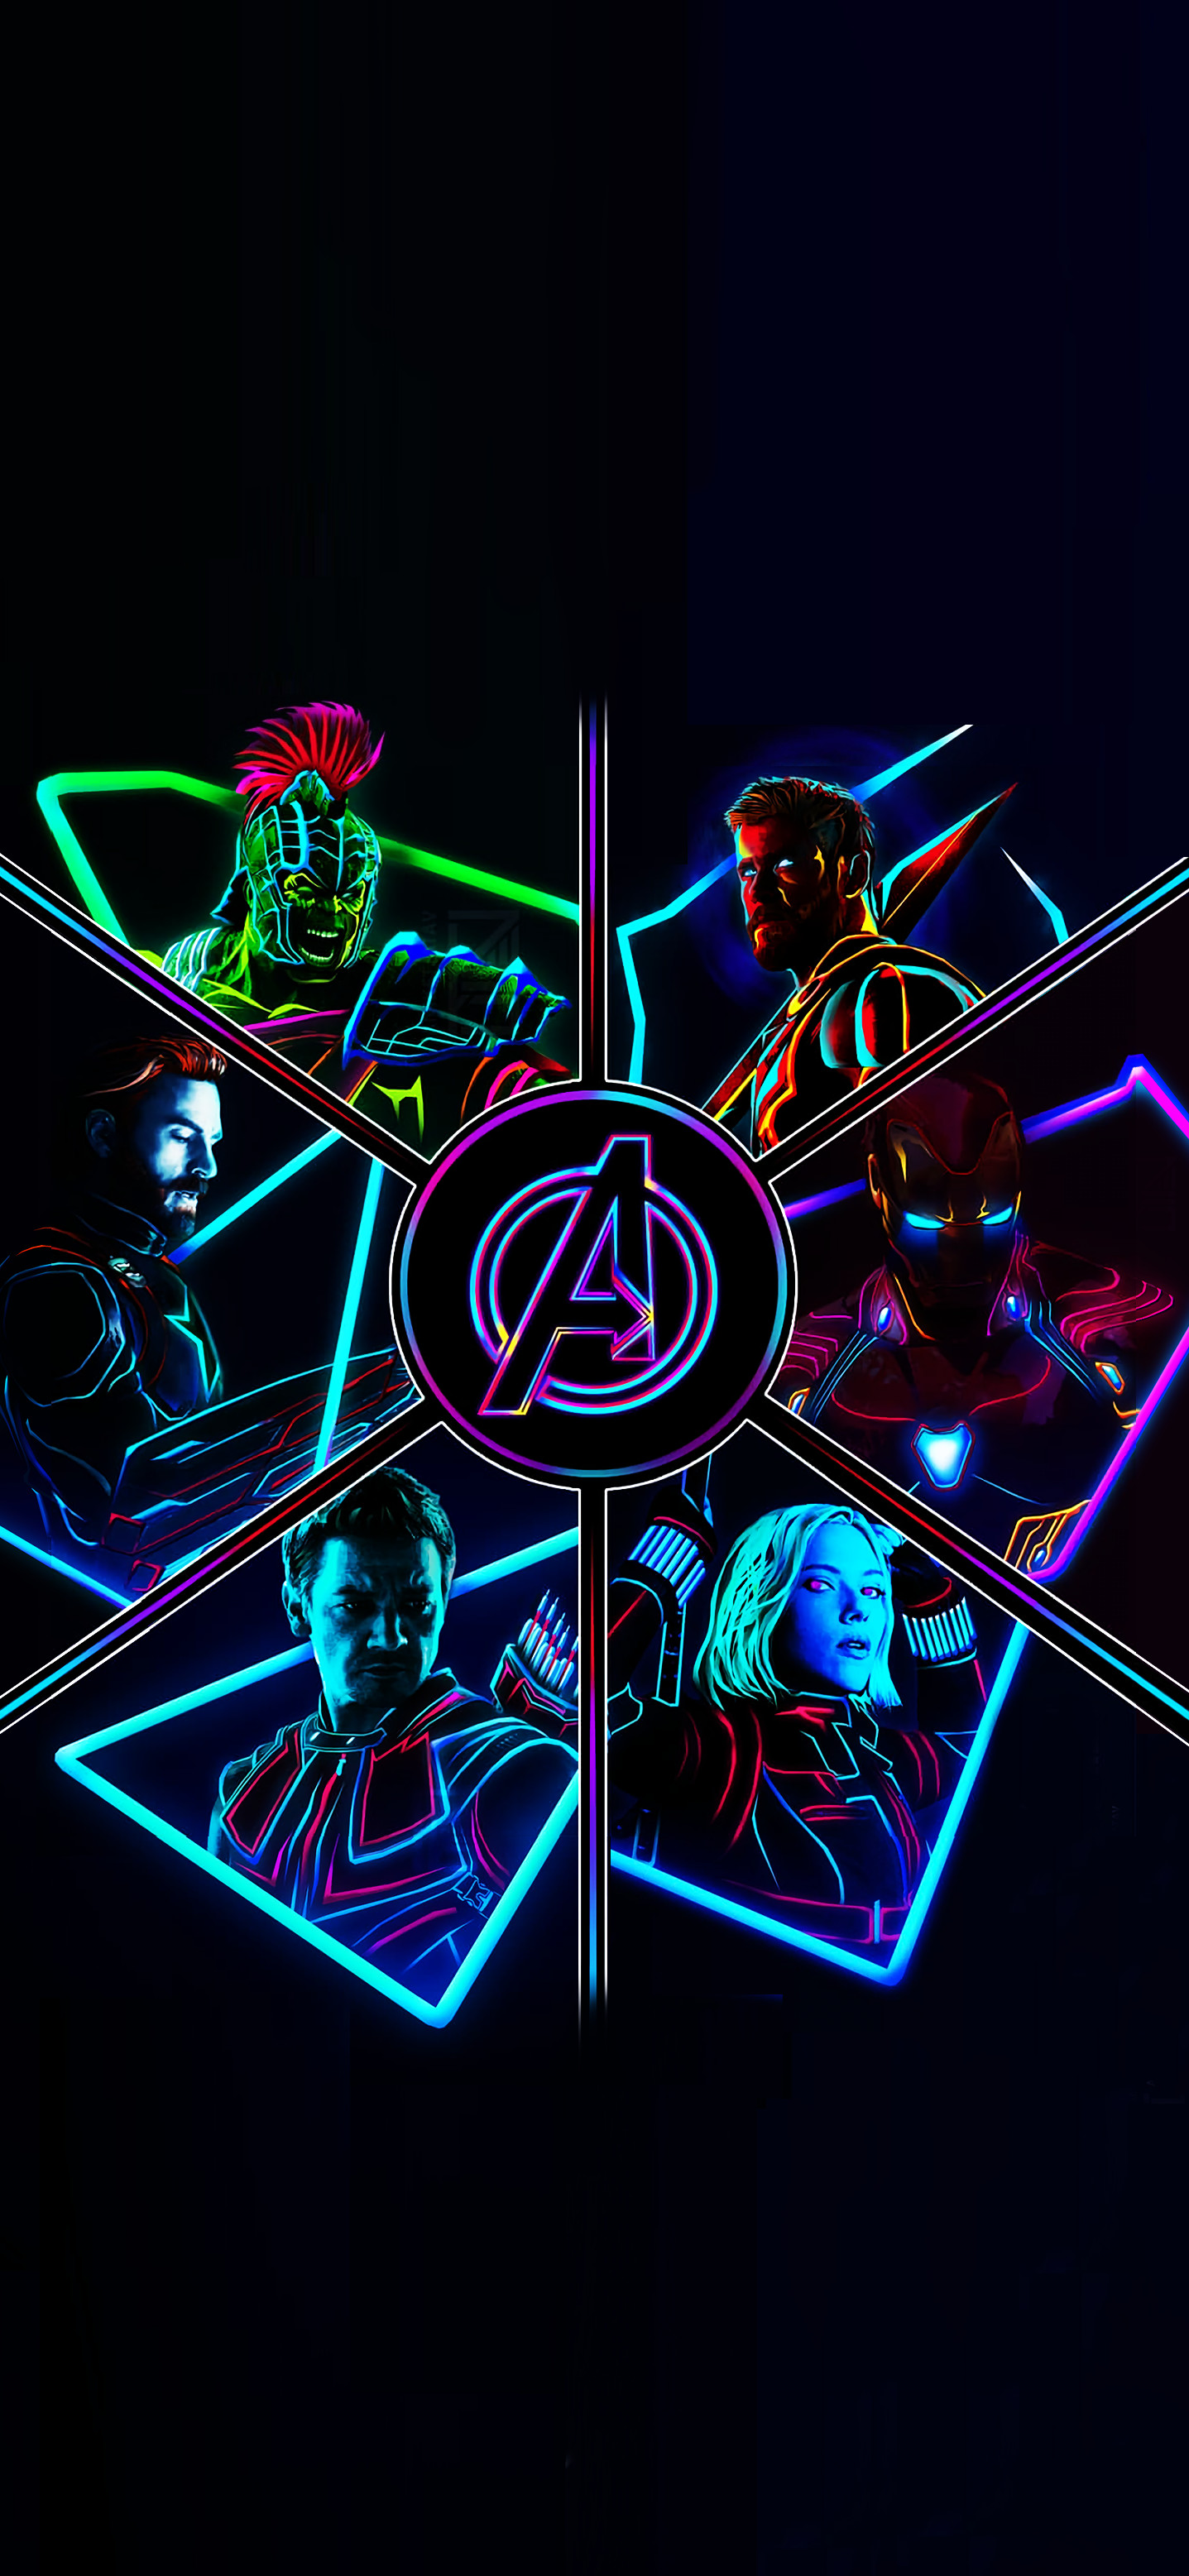 1437x3114, 2012 Neon Avengers Full Res Phone Wallpapers - Marvel Wallpaper Phone Hd - HD Wallpaper 